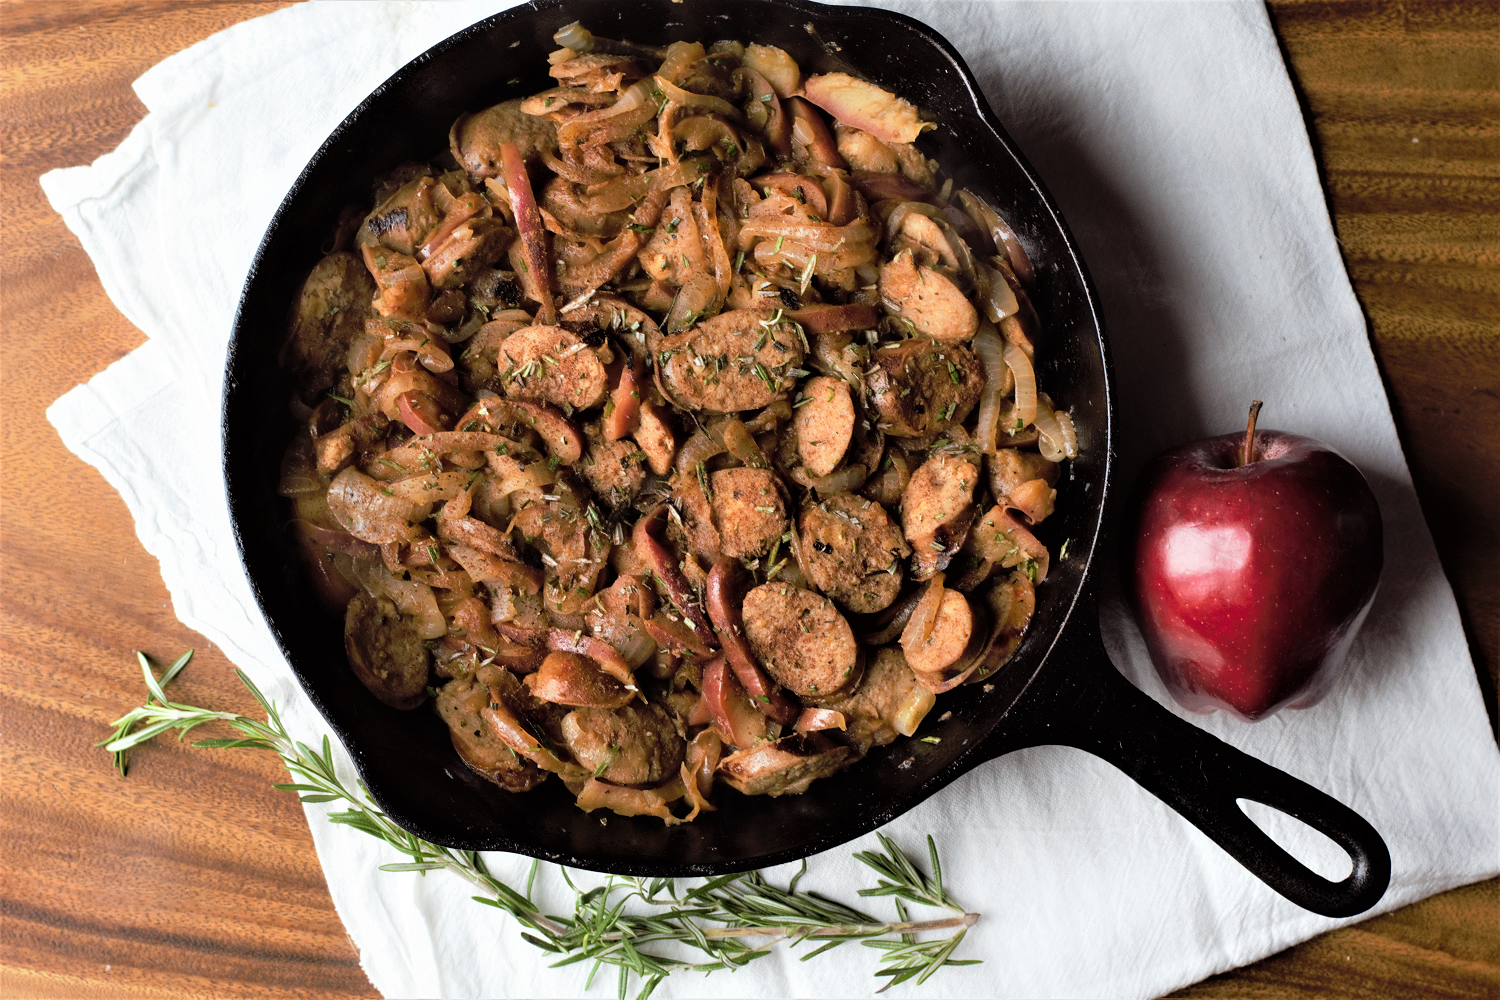 Apple & Rosemary Chicken Sausage Skillet | Mountain Cravings